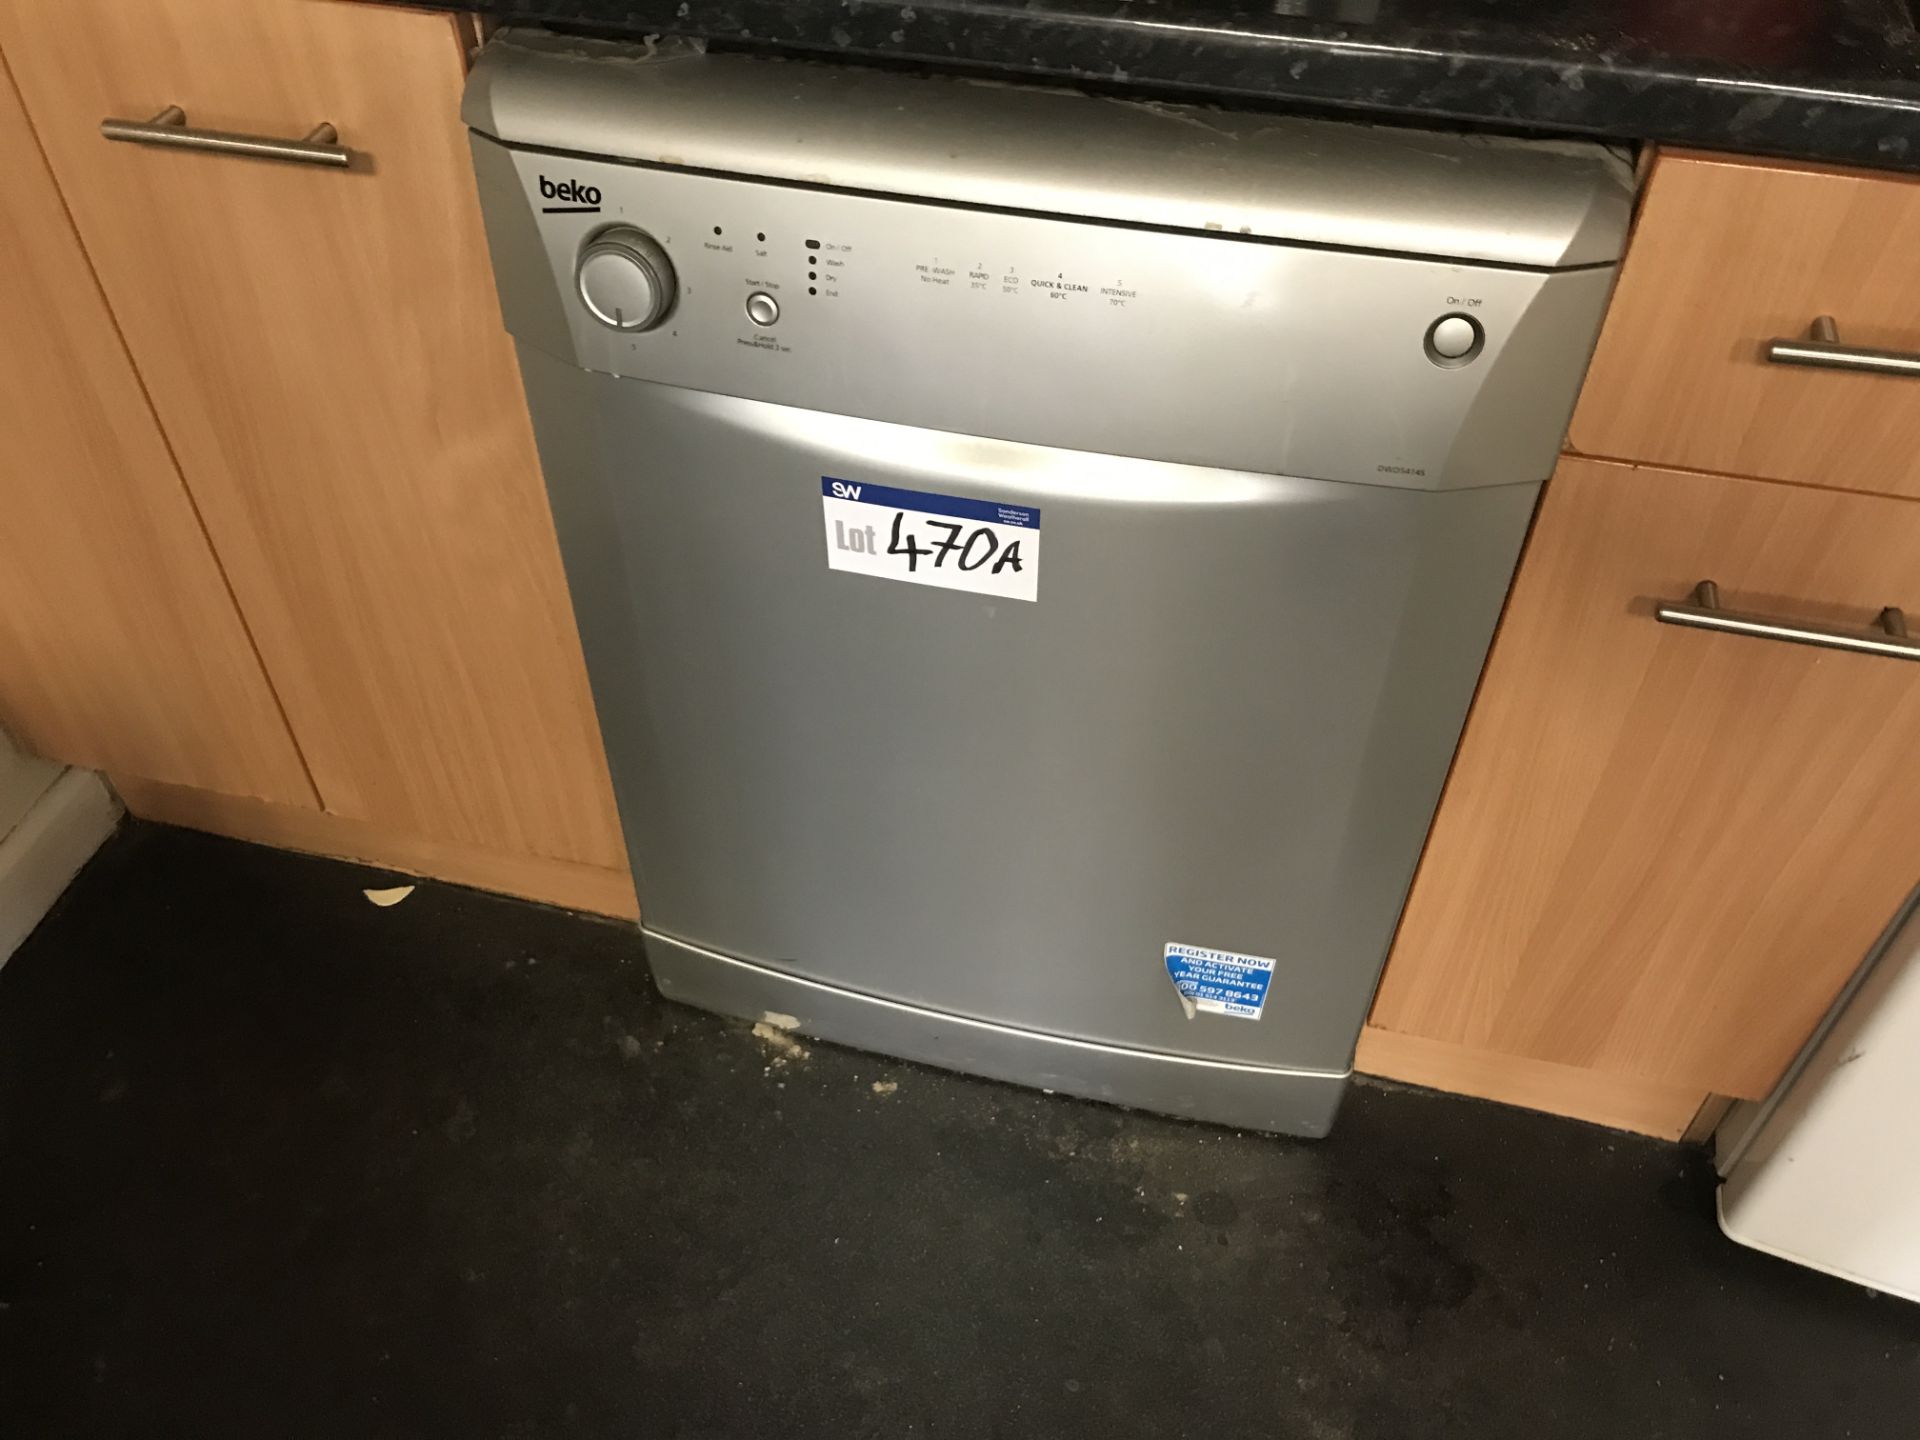 Beko DWD5414S Dishwasher, Refrigerator, Two Toasters and Microwave (lot located at Bedfords